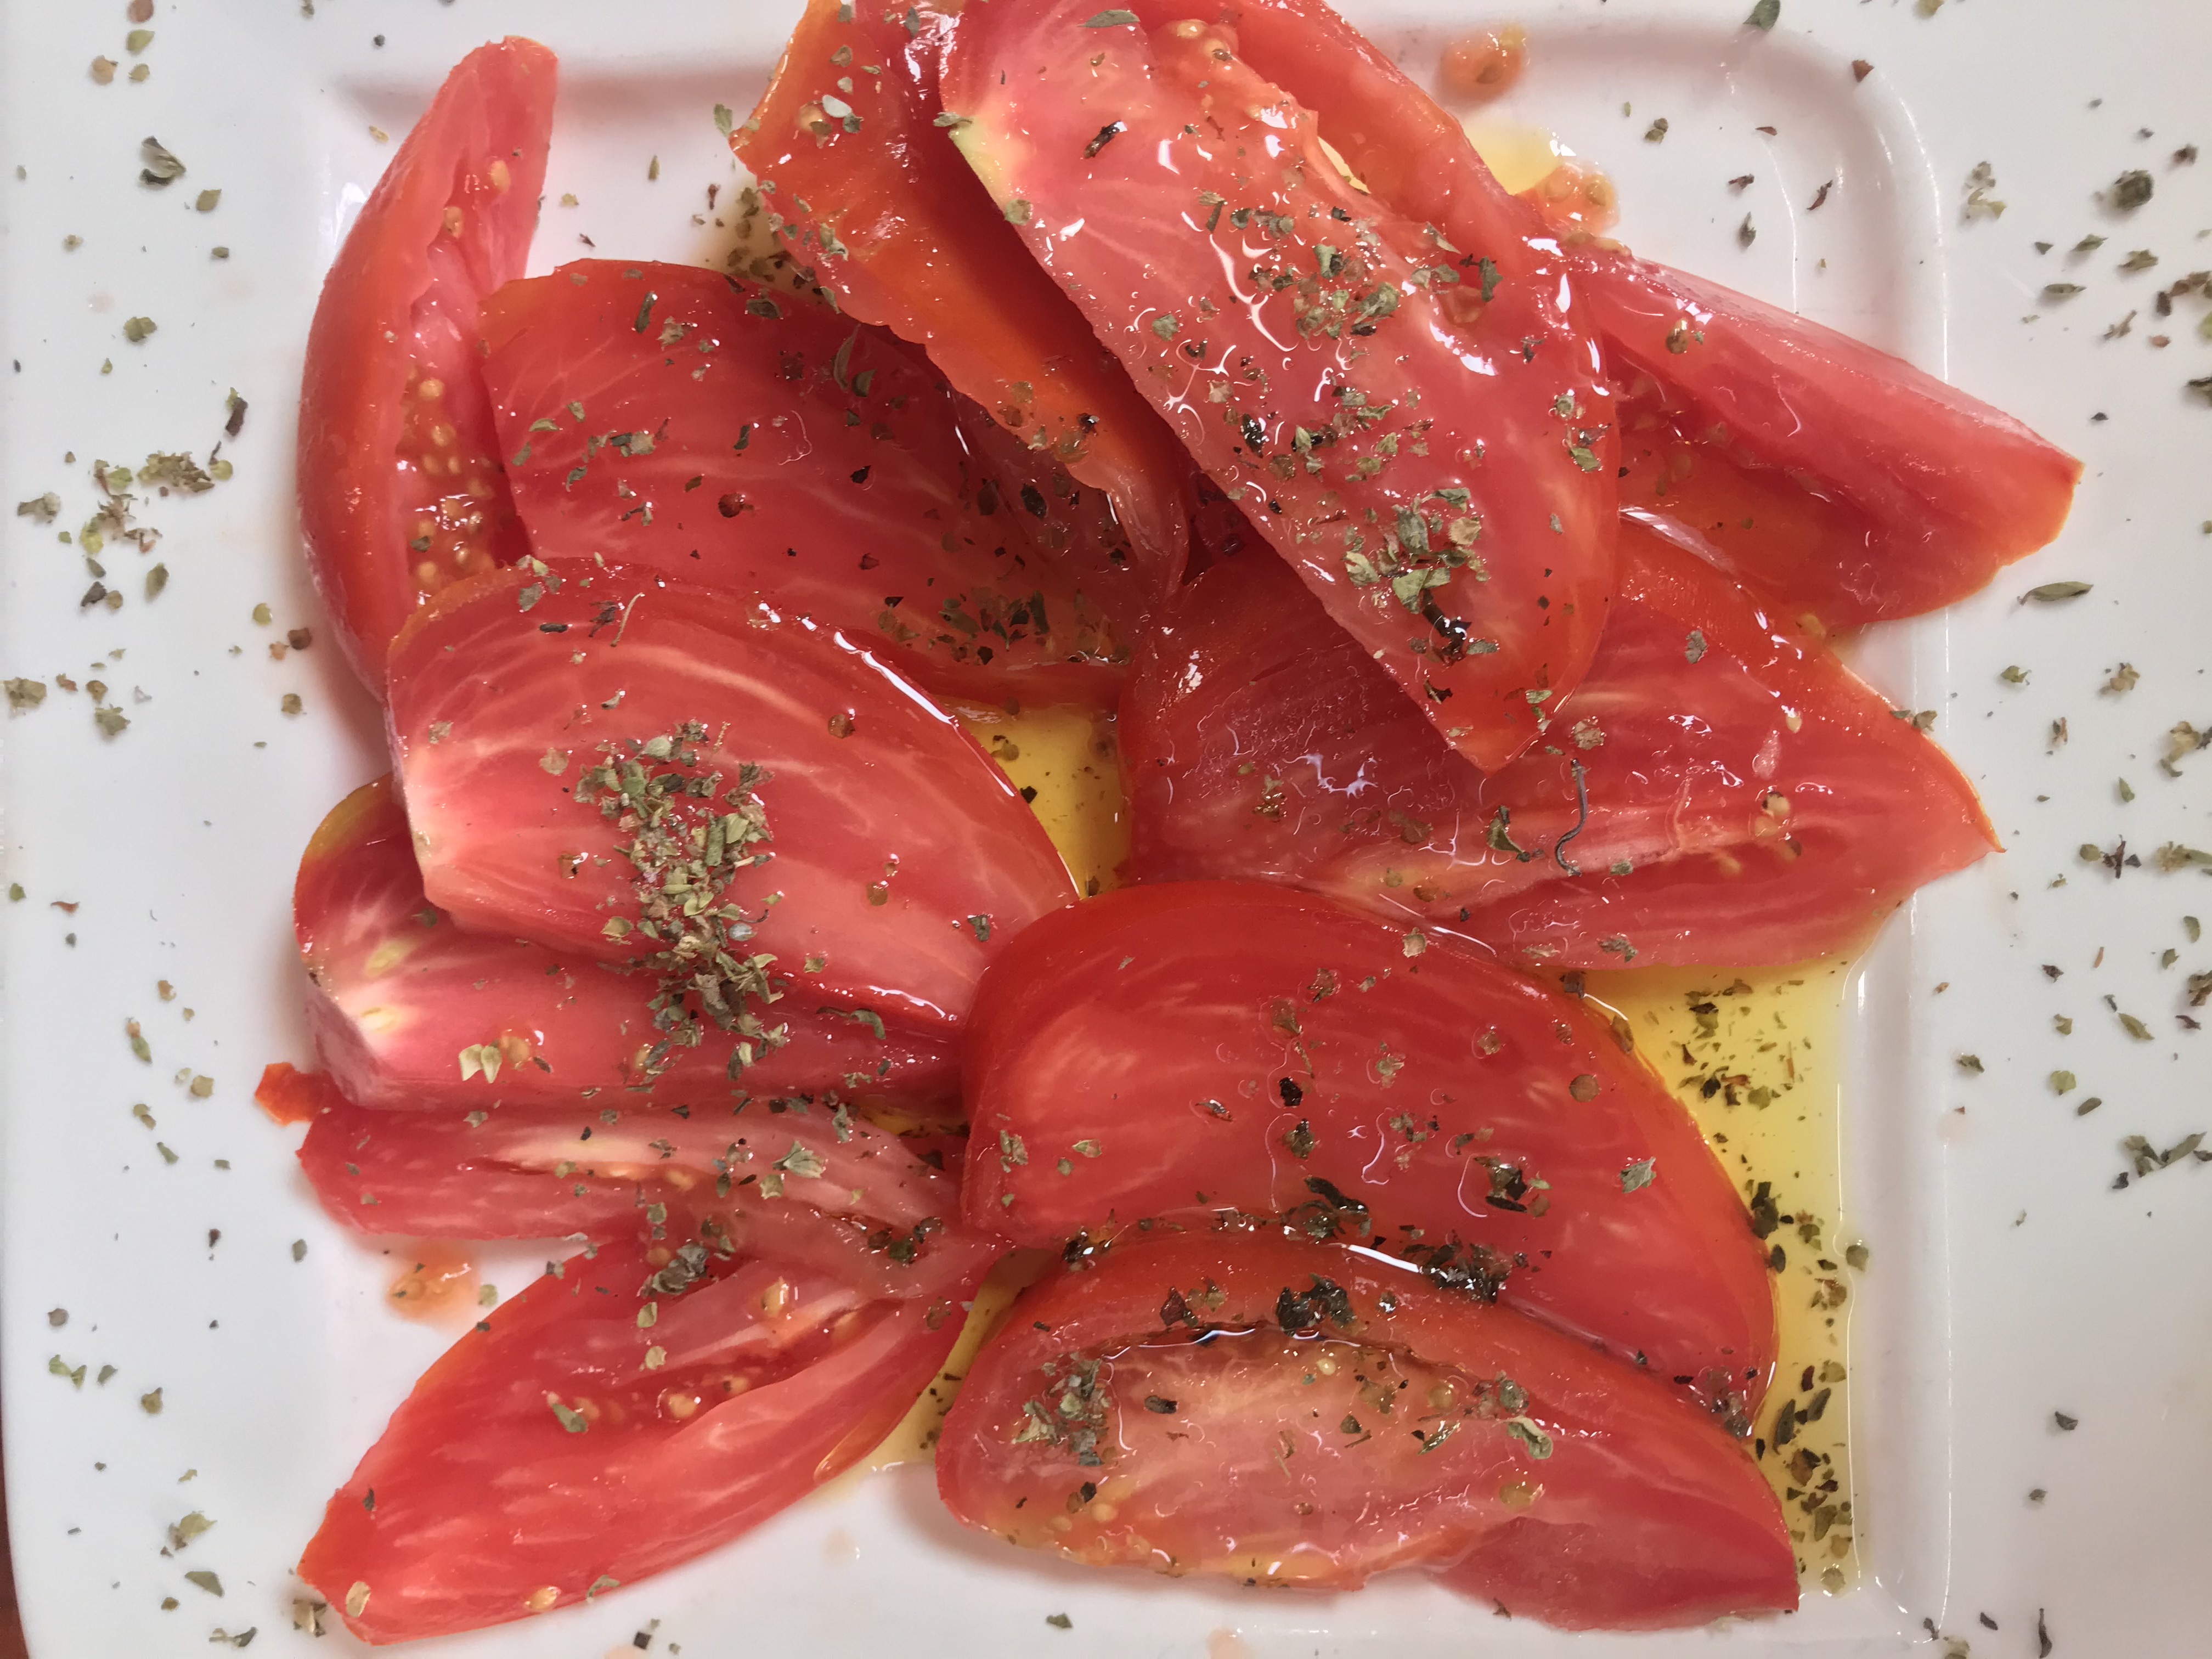 Raf tomato with anchovies and Mediterranean dressing